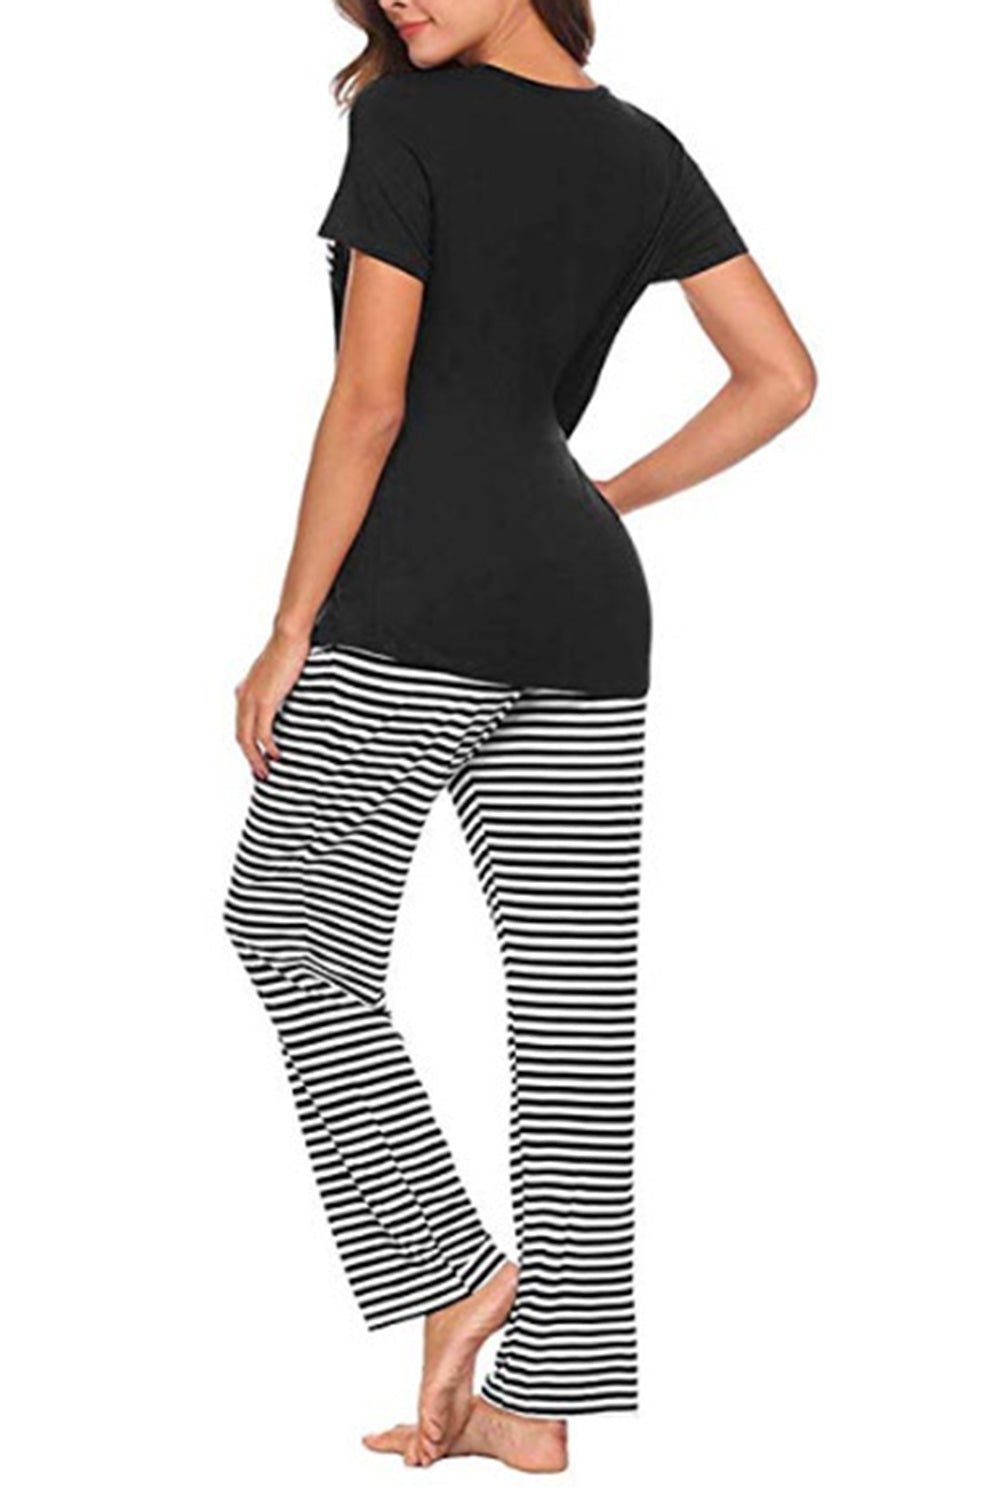 Pocketed Short Sleeve Top and Striped Pants Lounge Set - OMG! Rose